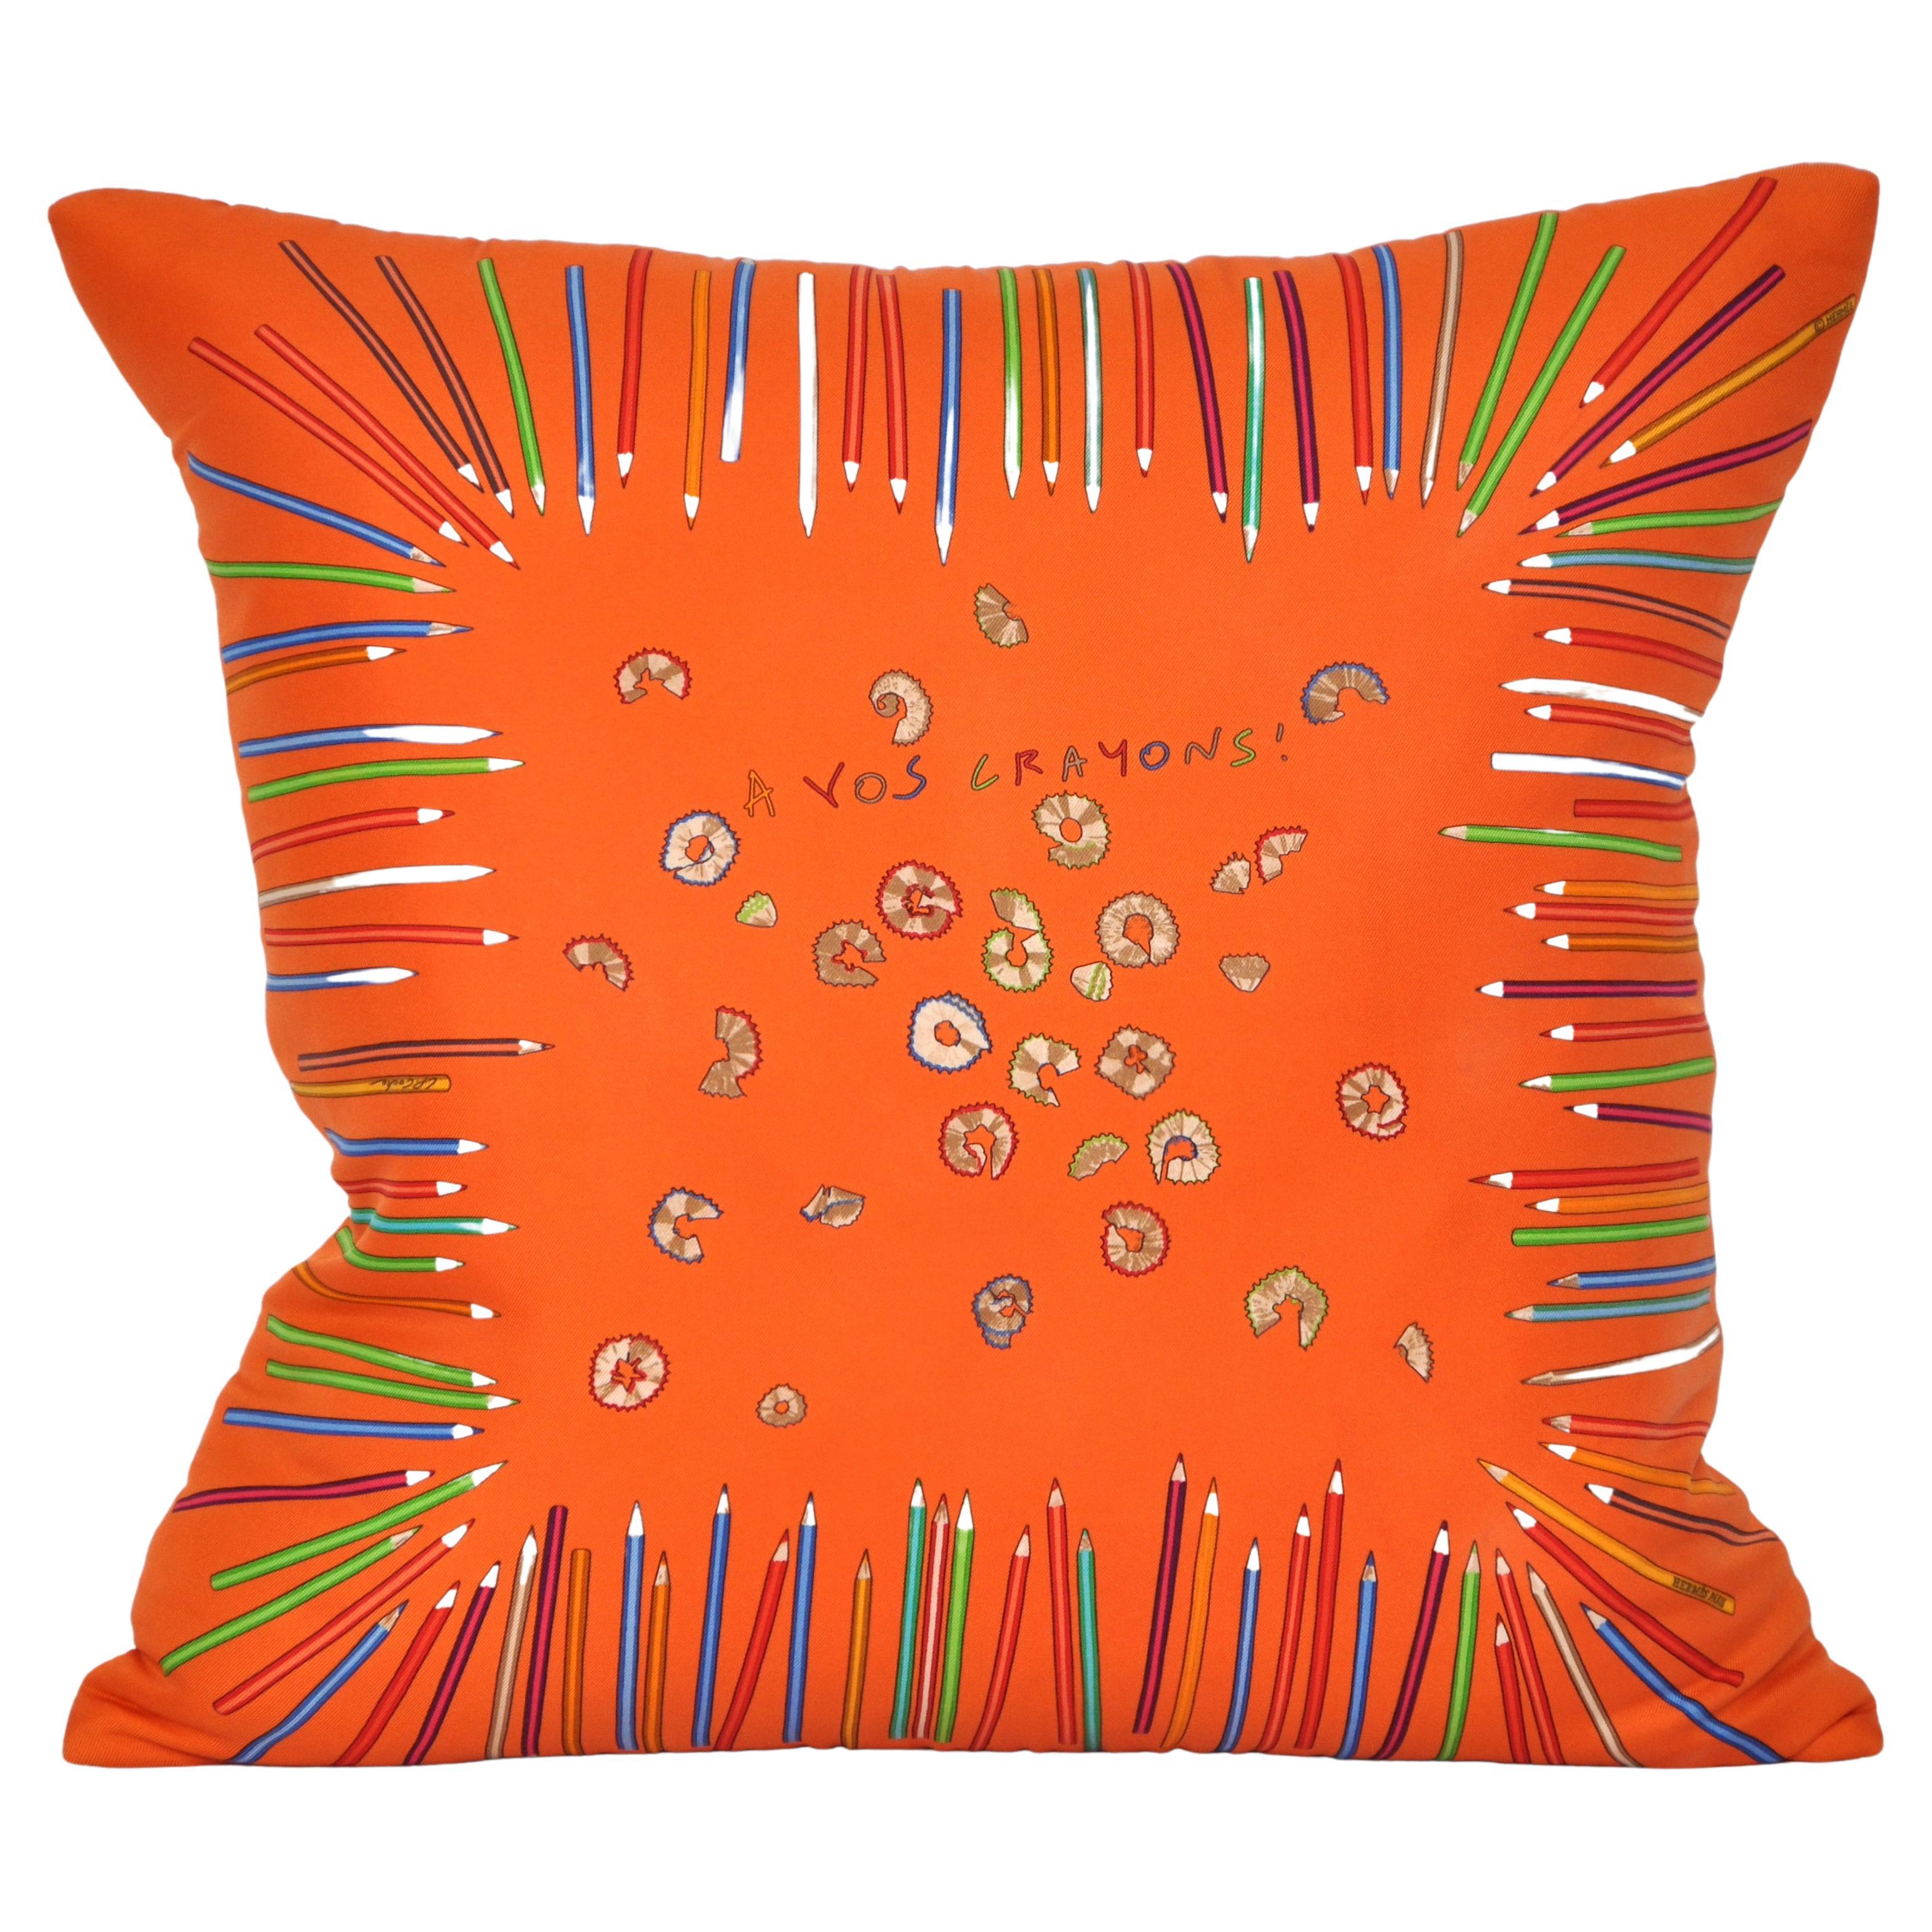 A collection of our Vintage Hermes silk scarf pillows